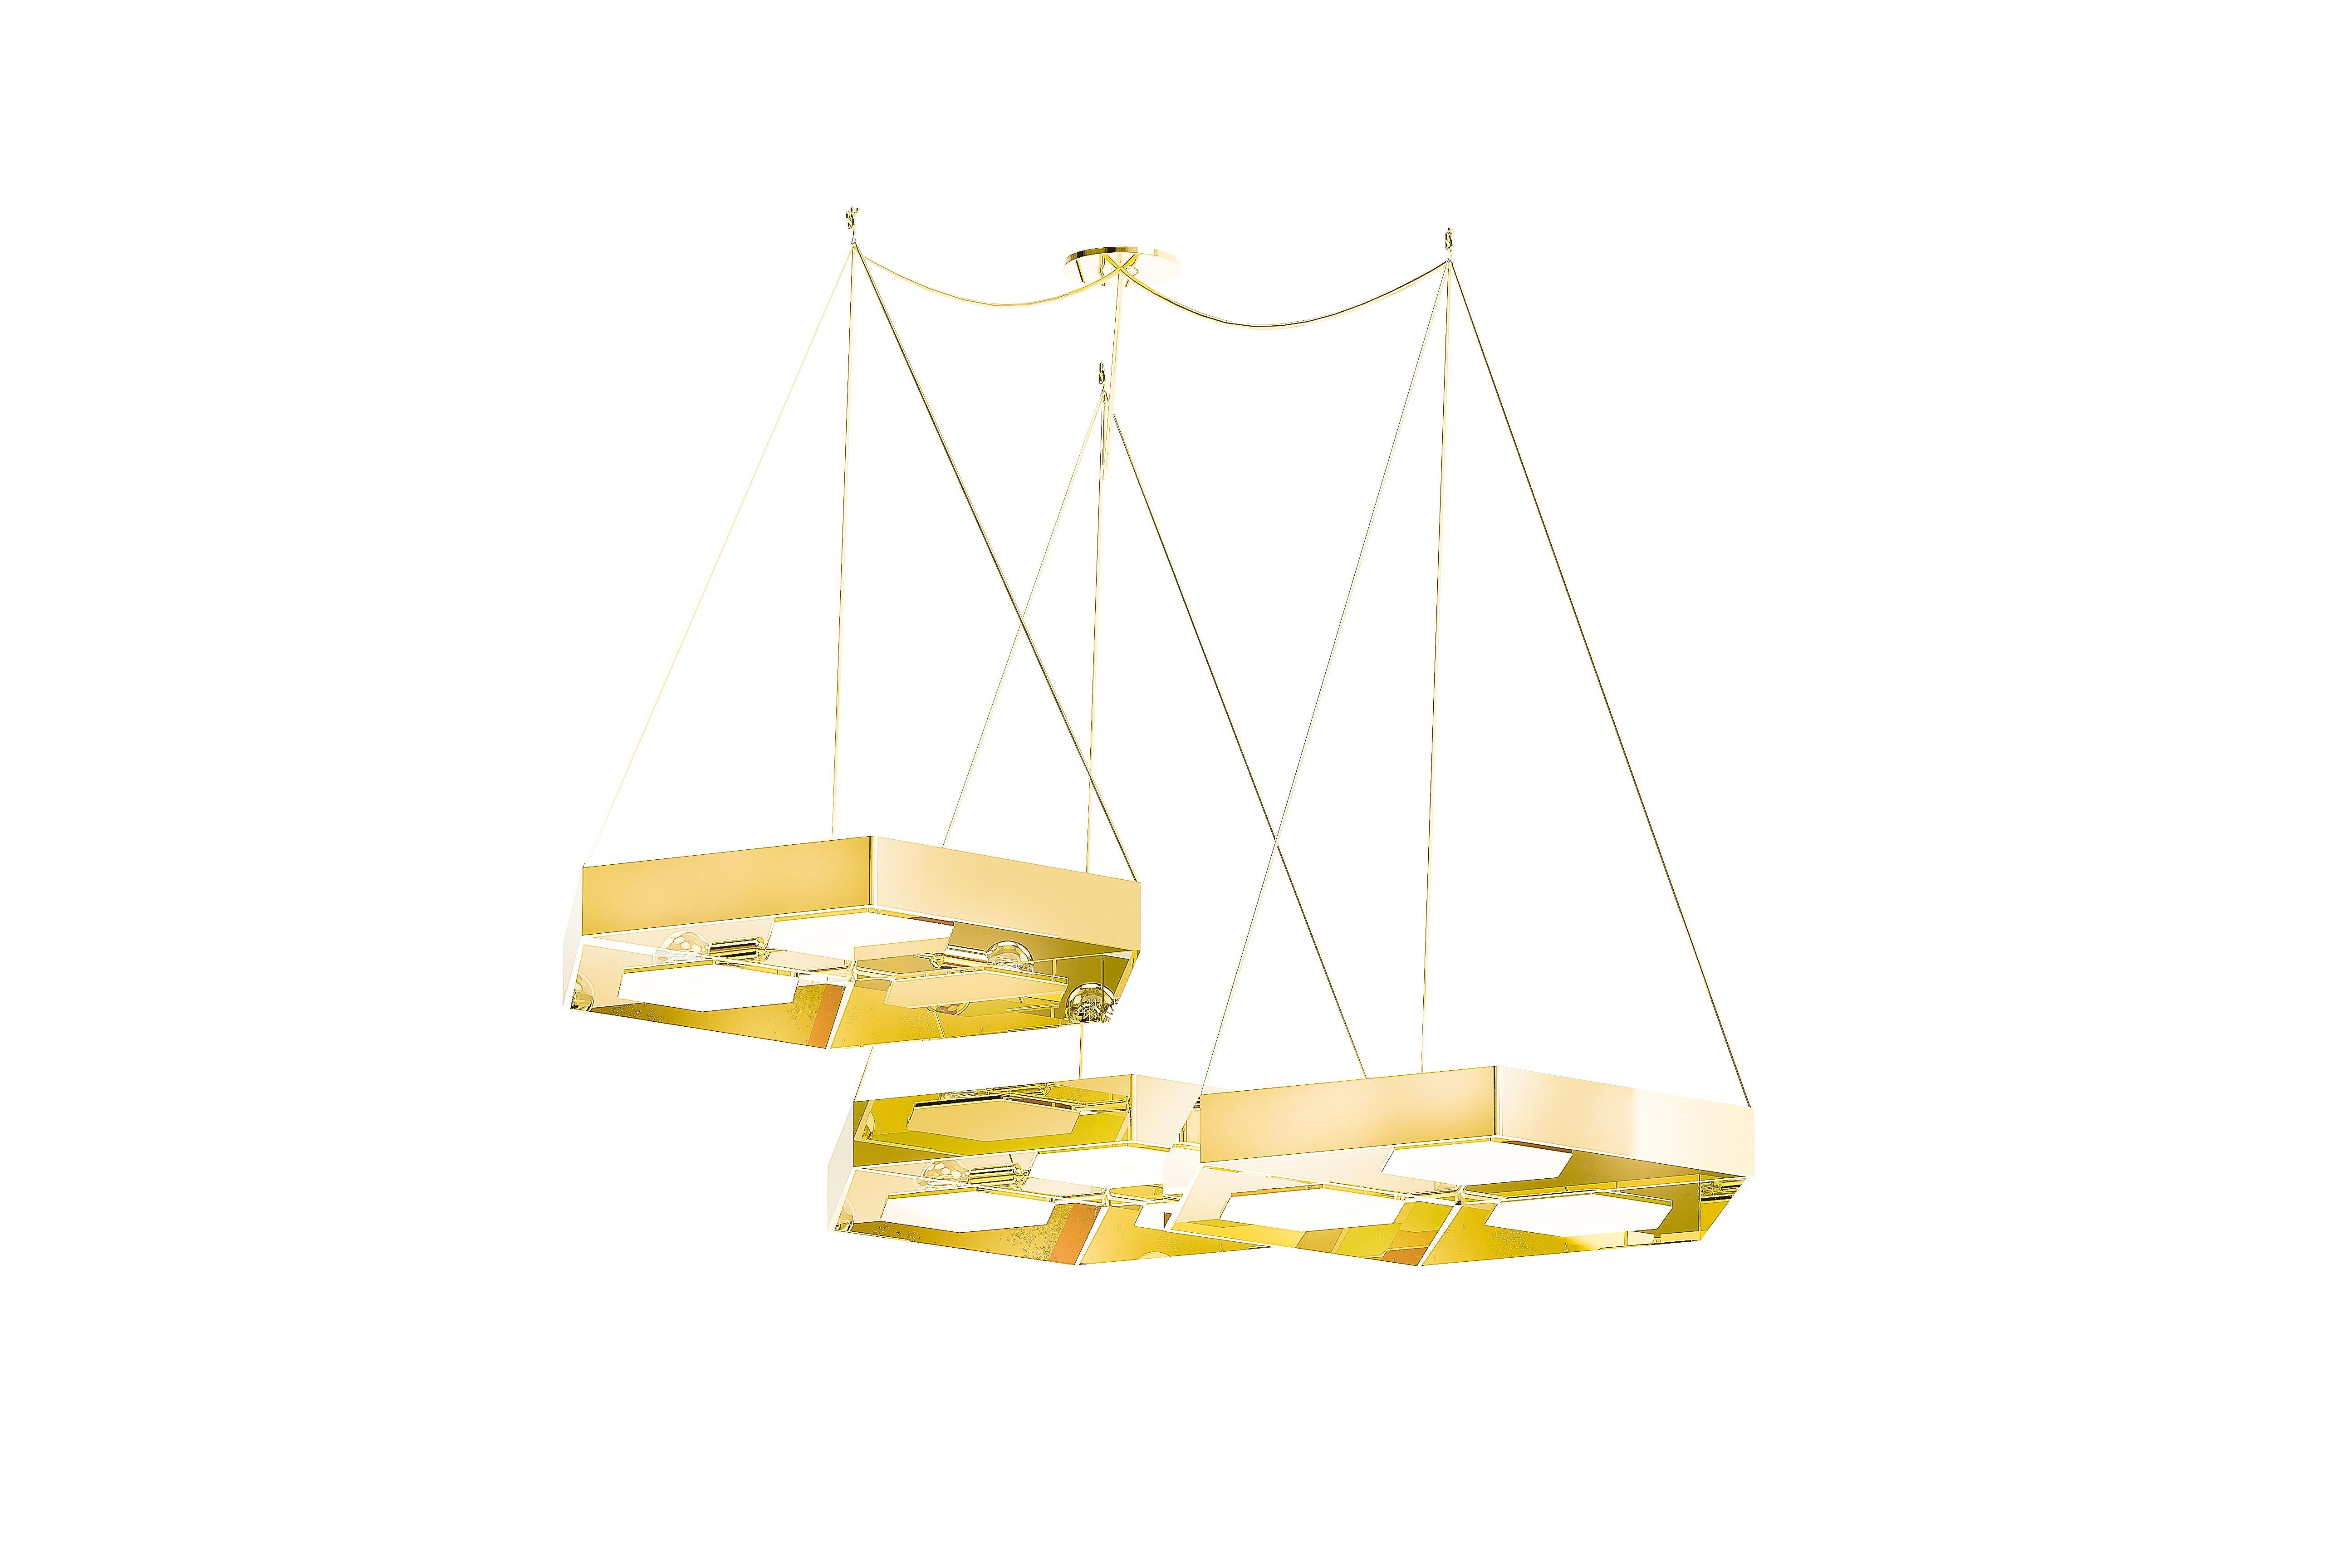 Honeybee ensemble of ceiling lamps, Royal Stranger
Dimensions: 16 x 80 x 83 cm (each one)
Sizes for each element. The total height is adjustable.
Material: Brass (also available in Copper or Stainless Steel in polished or brushed finish.).

A